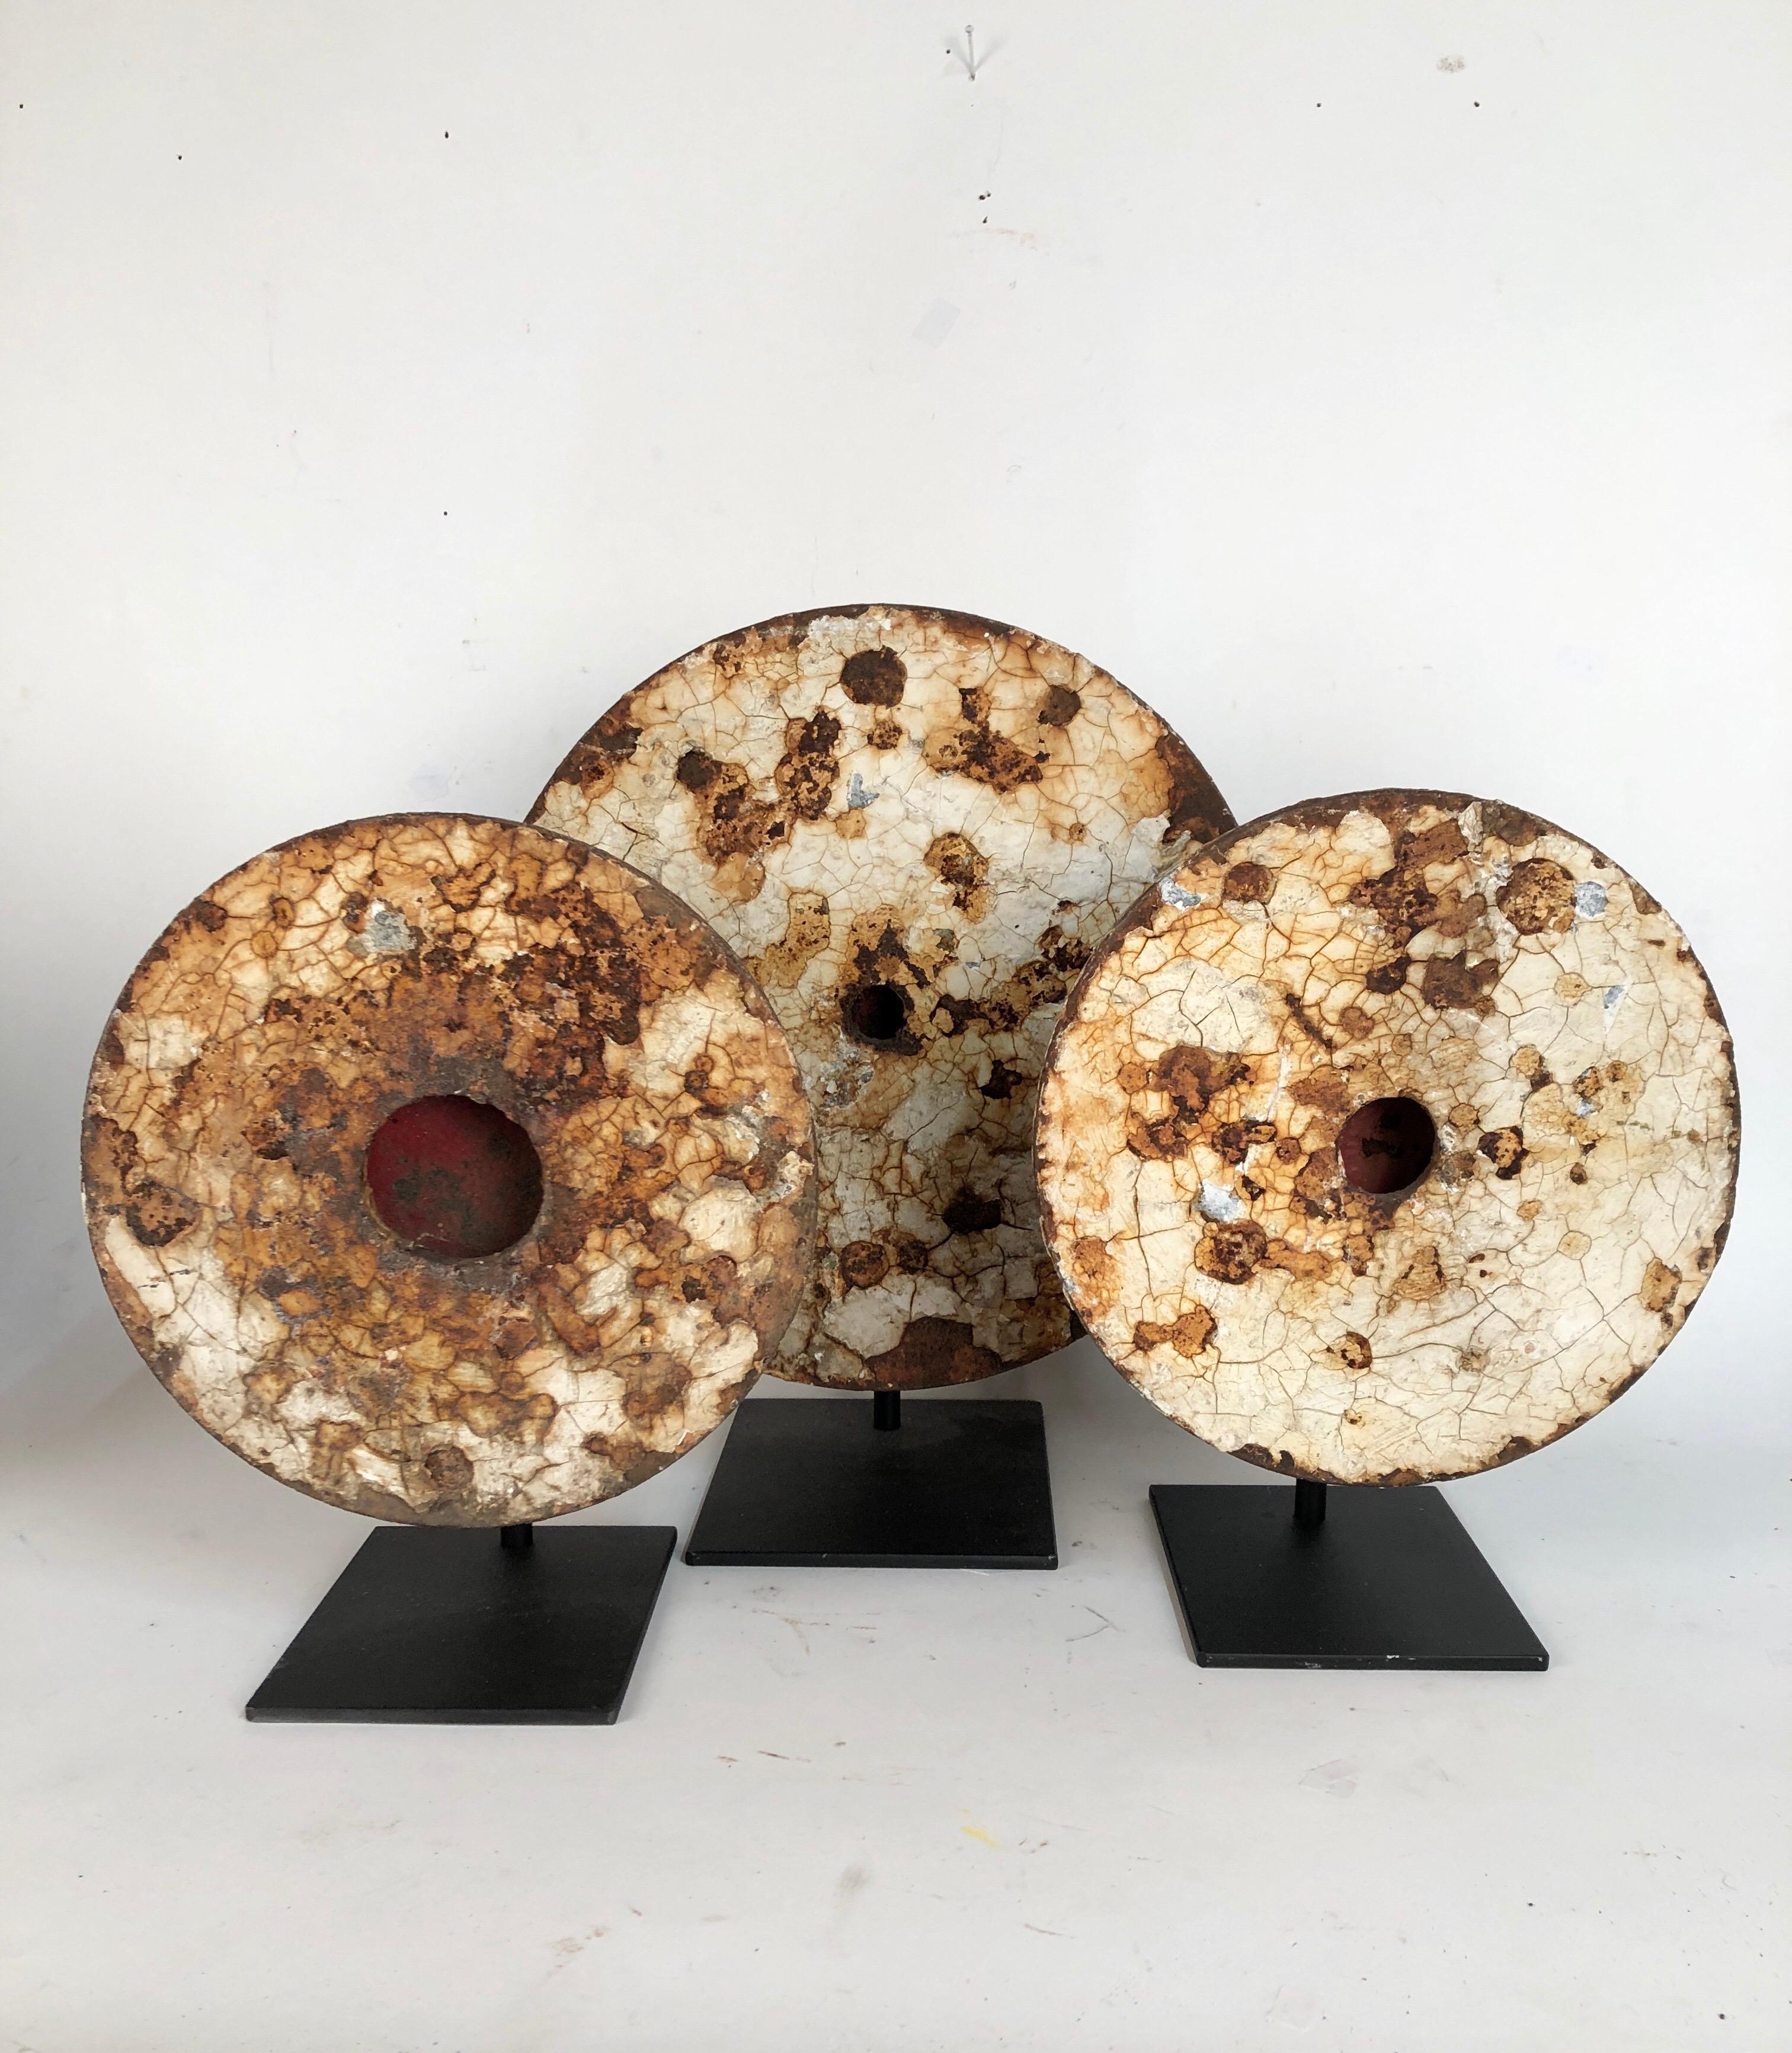 A group of three antique cast iron shooting gallery targets made by the same firm with extraordinary aged original white painted surfaces. All three have their original red strike plates. They range in depth from 6.25 to 7.5